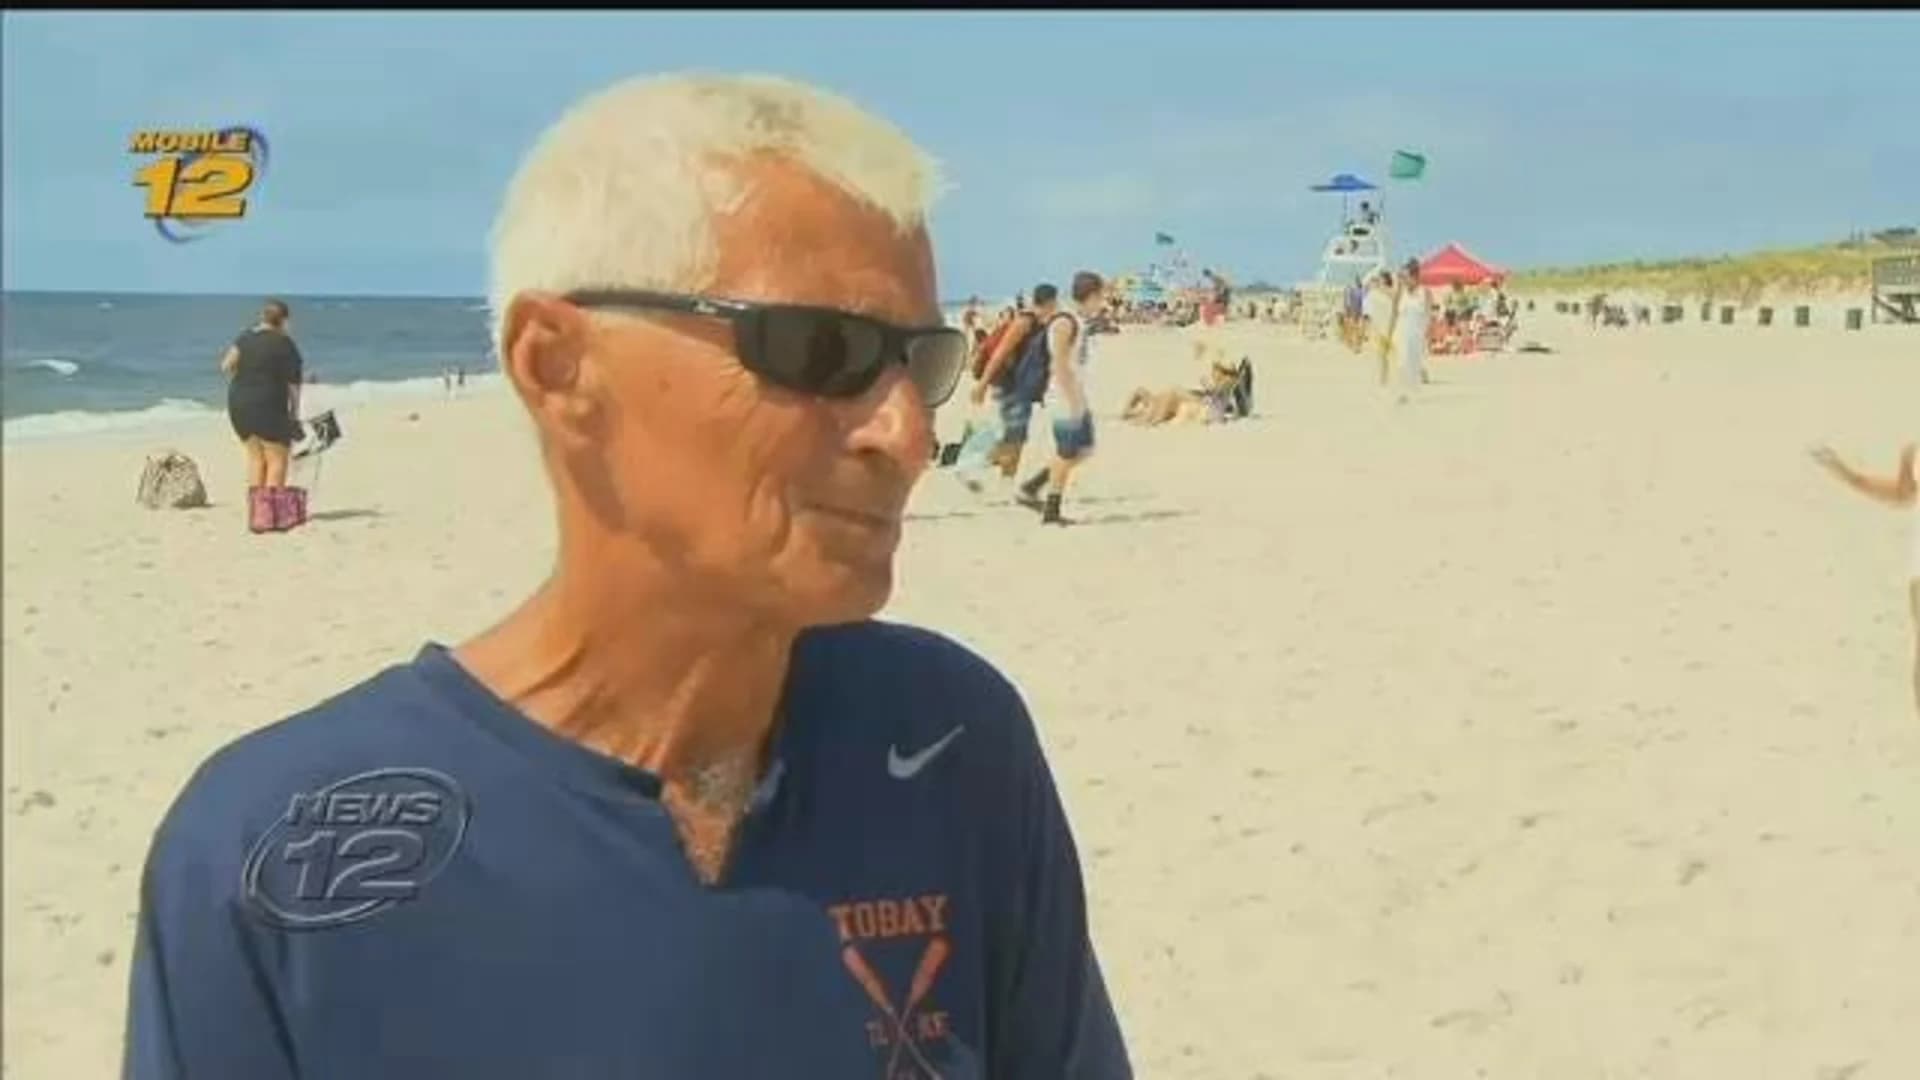 Longtime Oyster Bay lifeguard honored at Tobay Beach